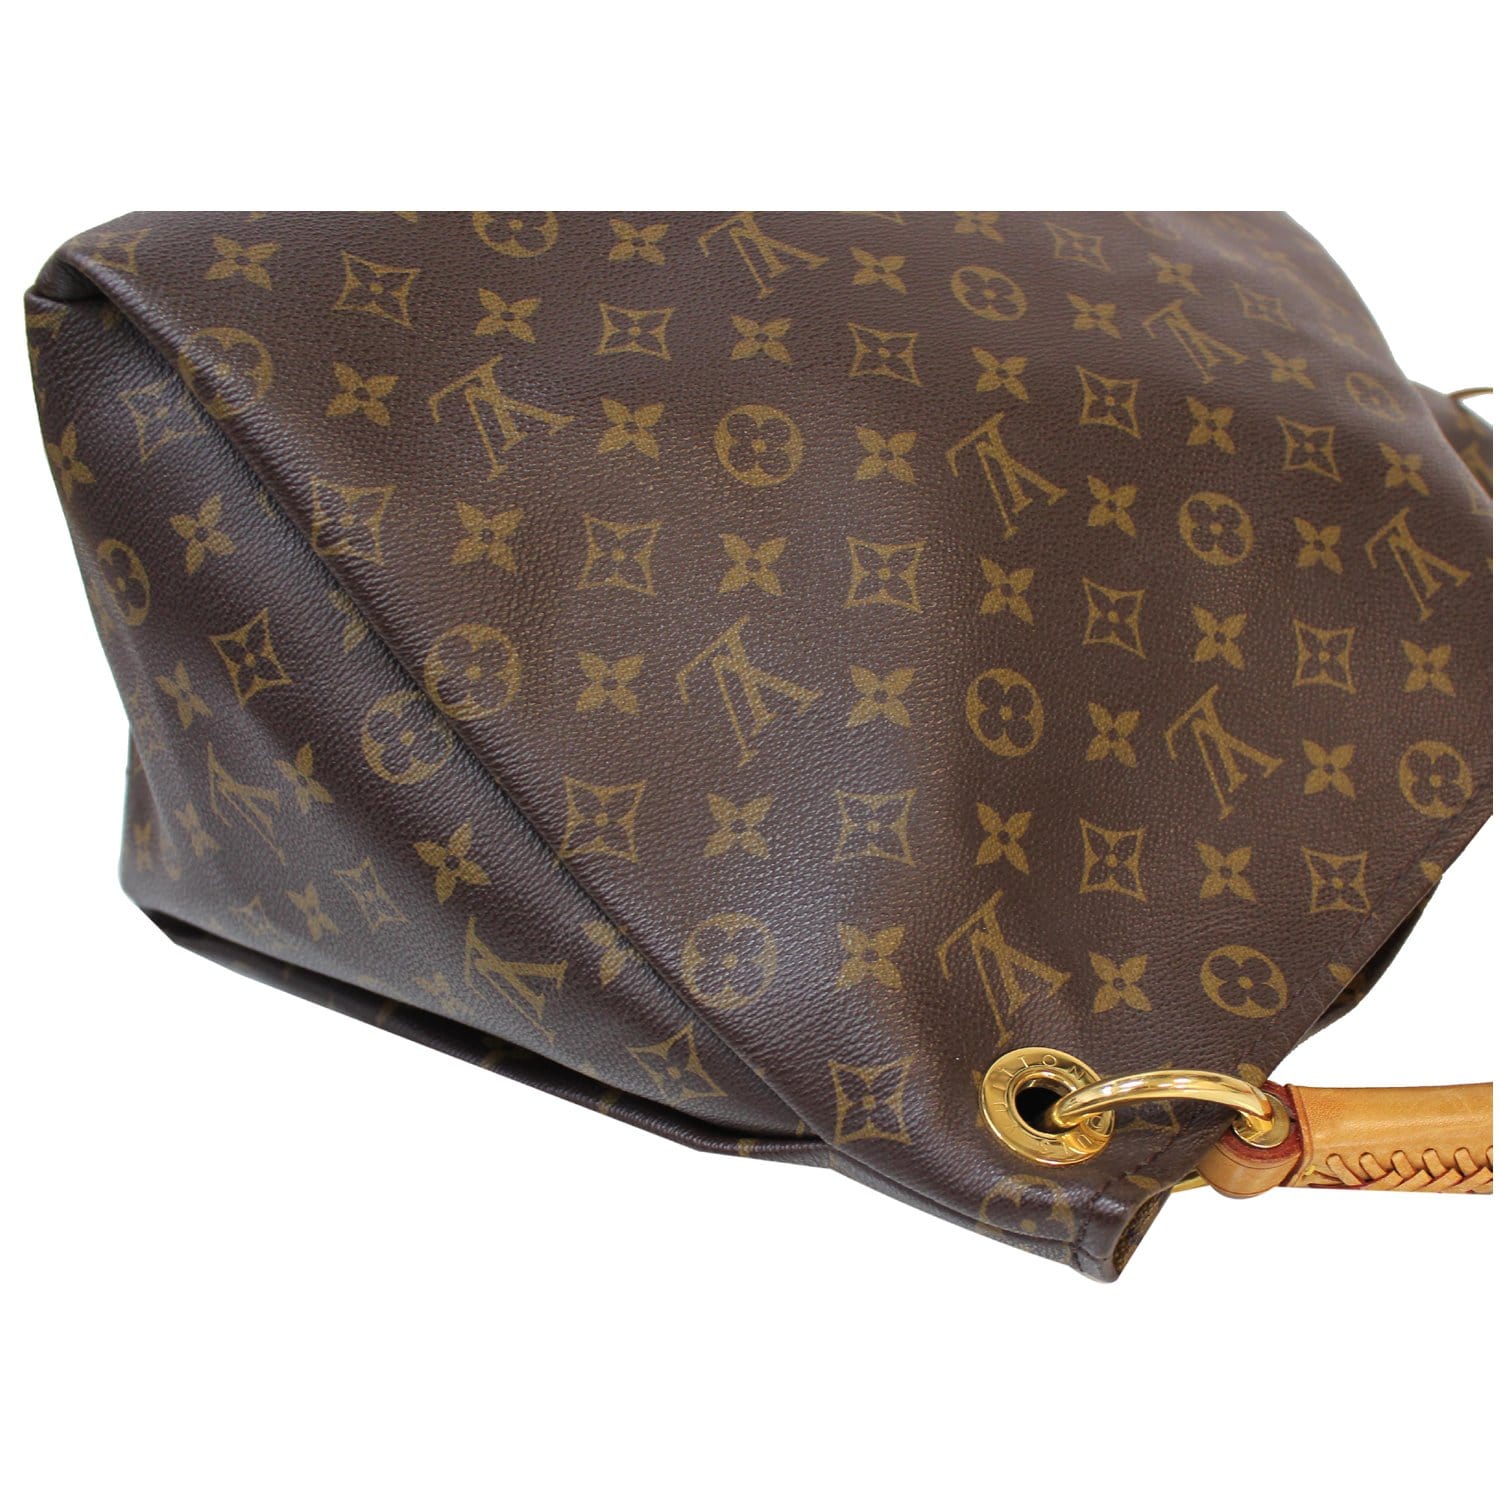 Louis Vuitton - Authenticated Artsy Handbag - Cloth Brown for Women, Very Good Condition